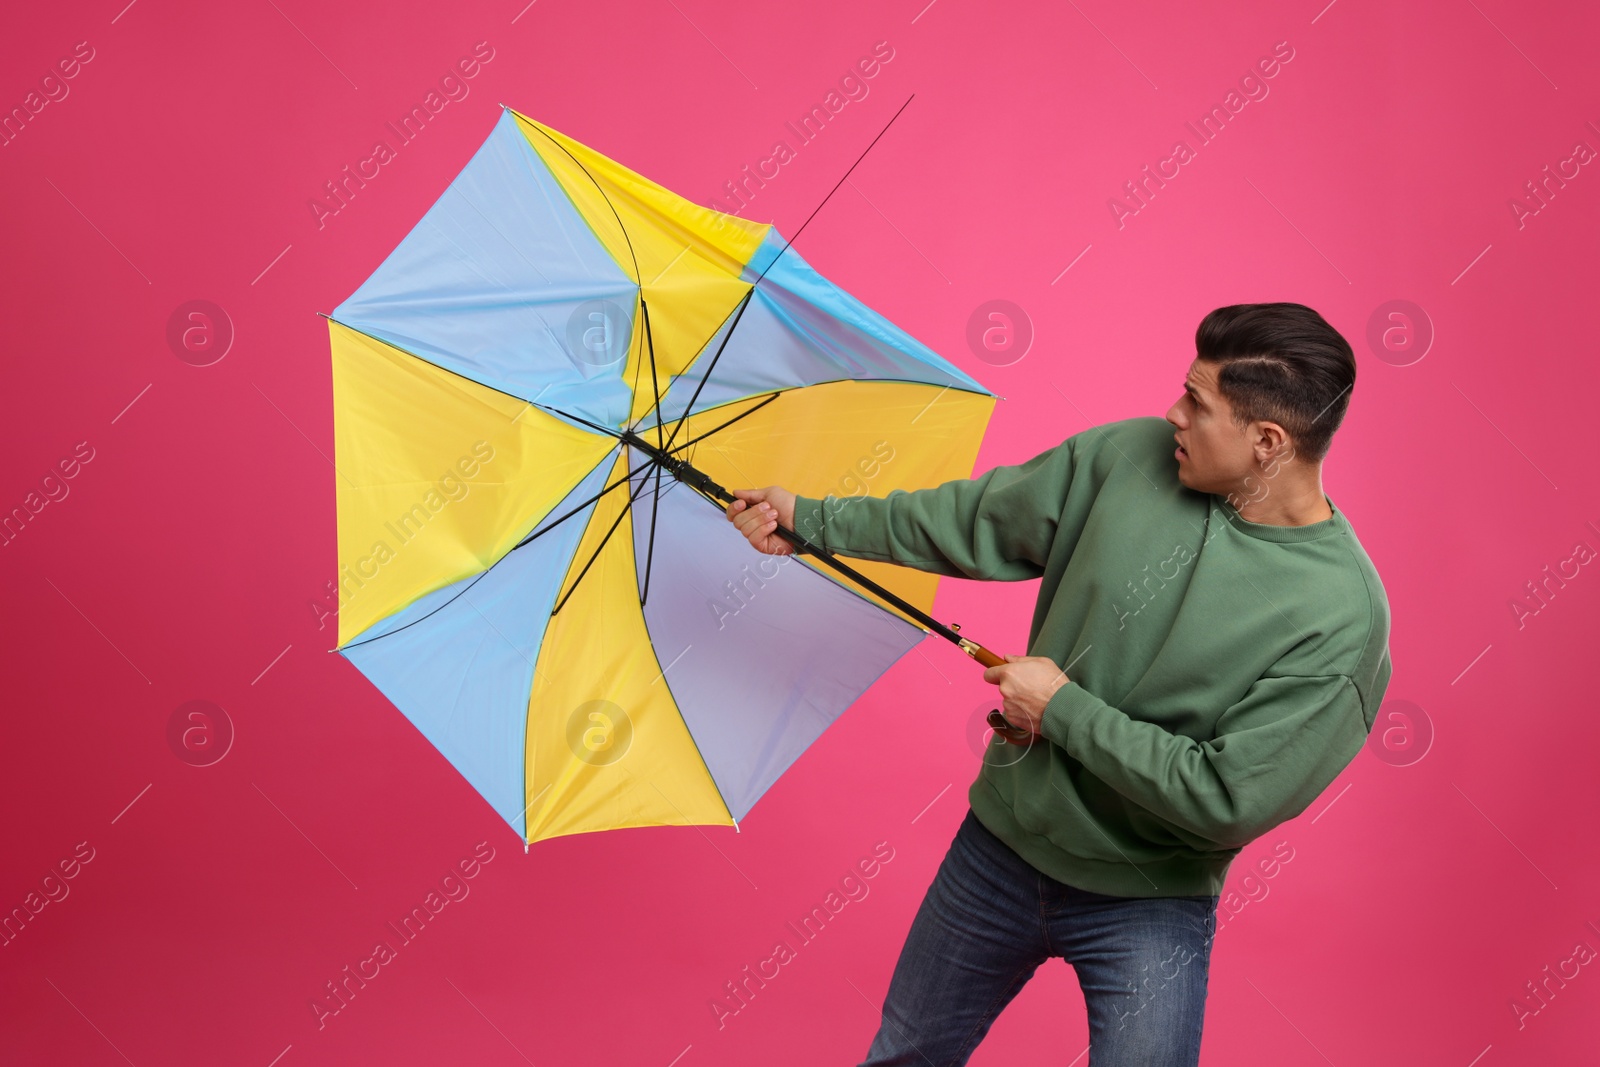 Photo of Man with umbrella caught in gust of wind on pink background